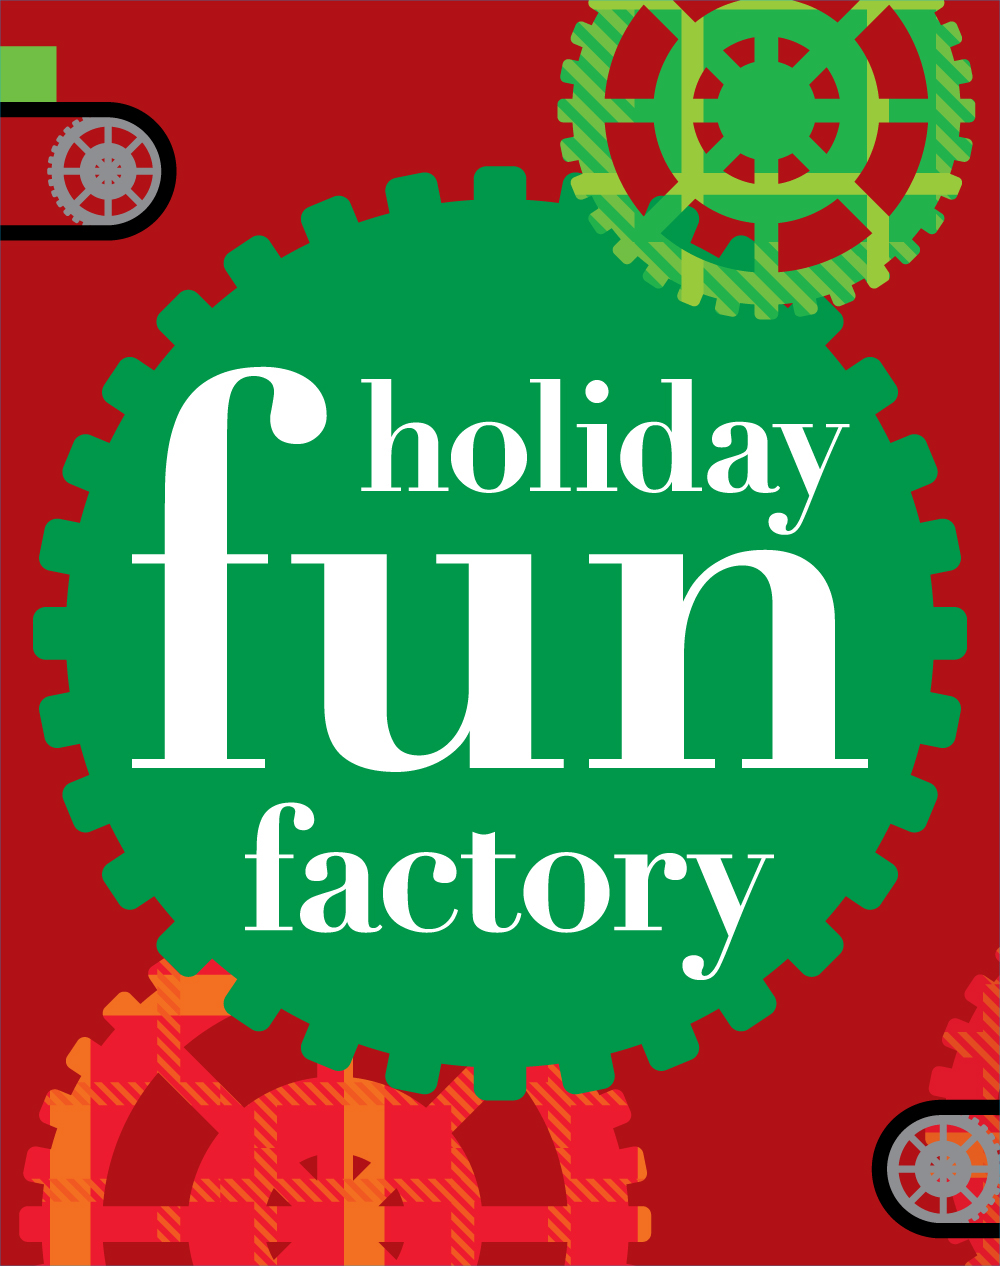 Holiday Christmas winter santa elves factory gears Presents red green